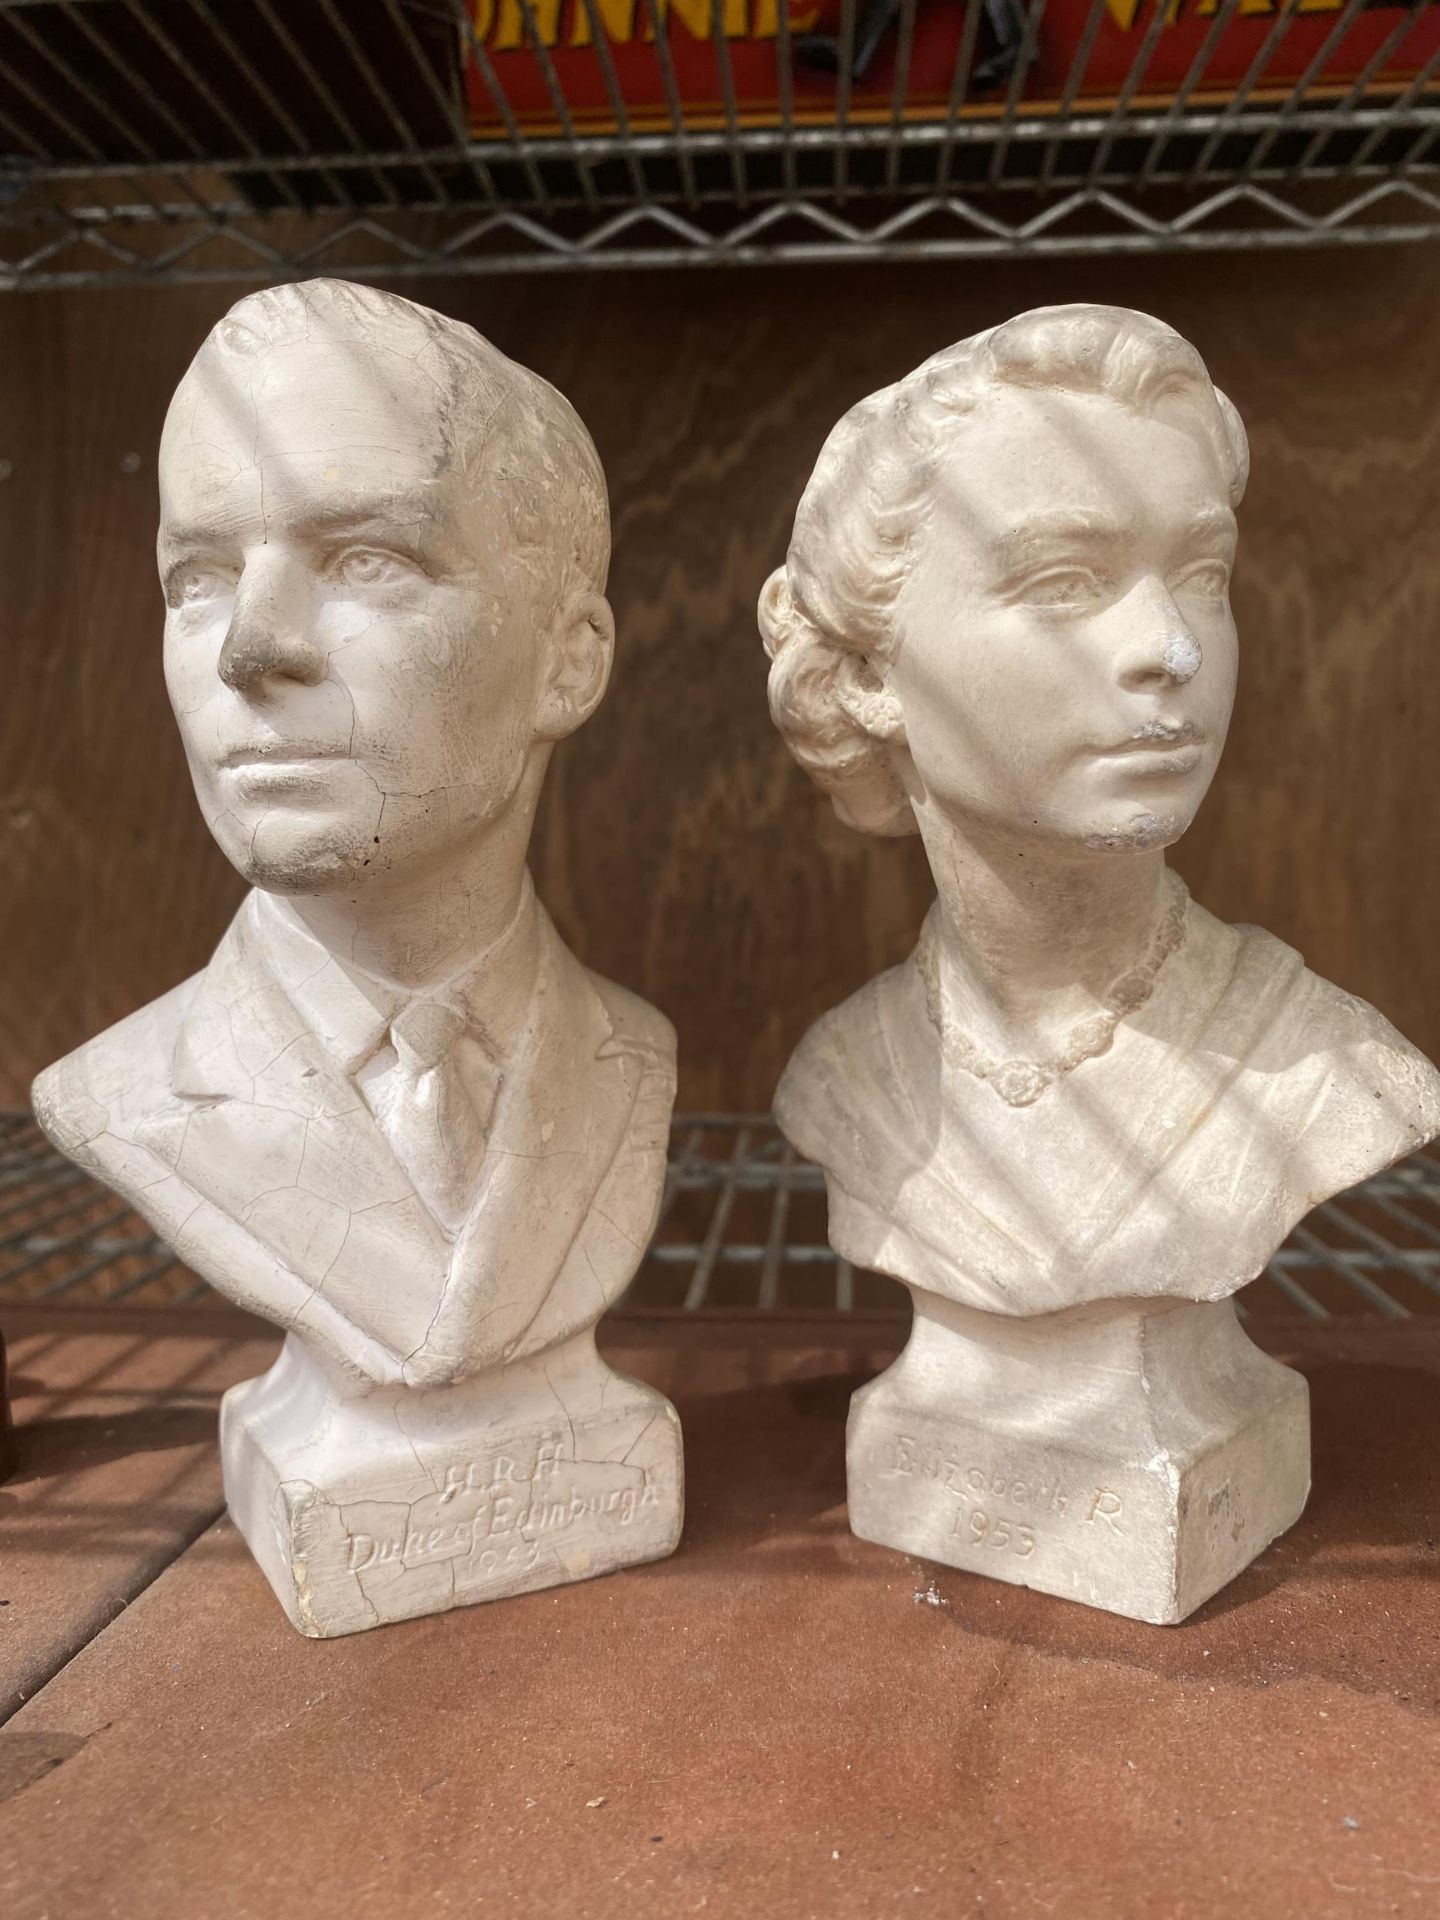 A PAIR OF VINTAGE STONE EFFECT BUSTS OF QUEEN ELIZABETH AND THE DUKE OF EDINBURGH